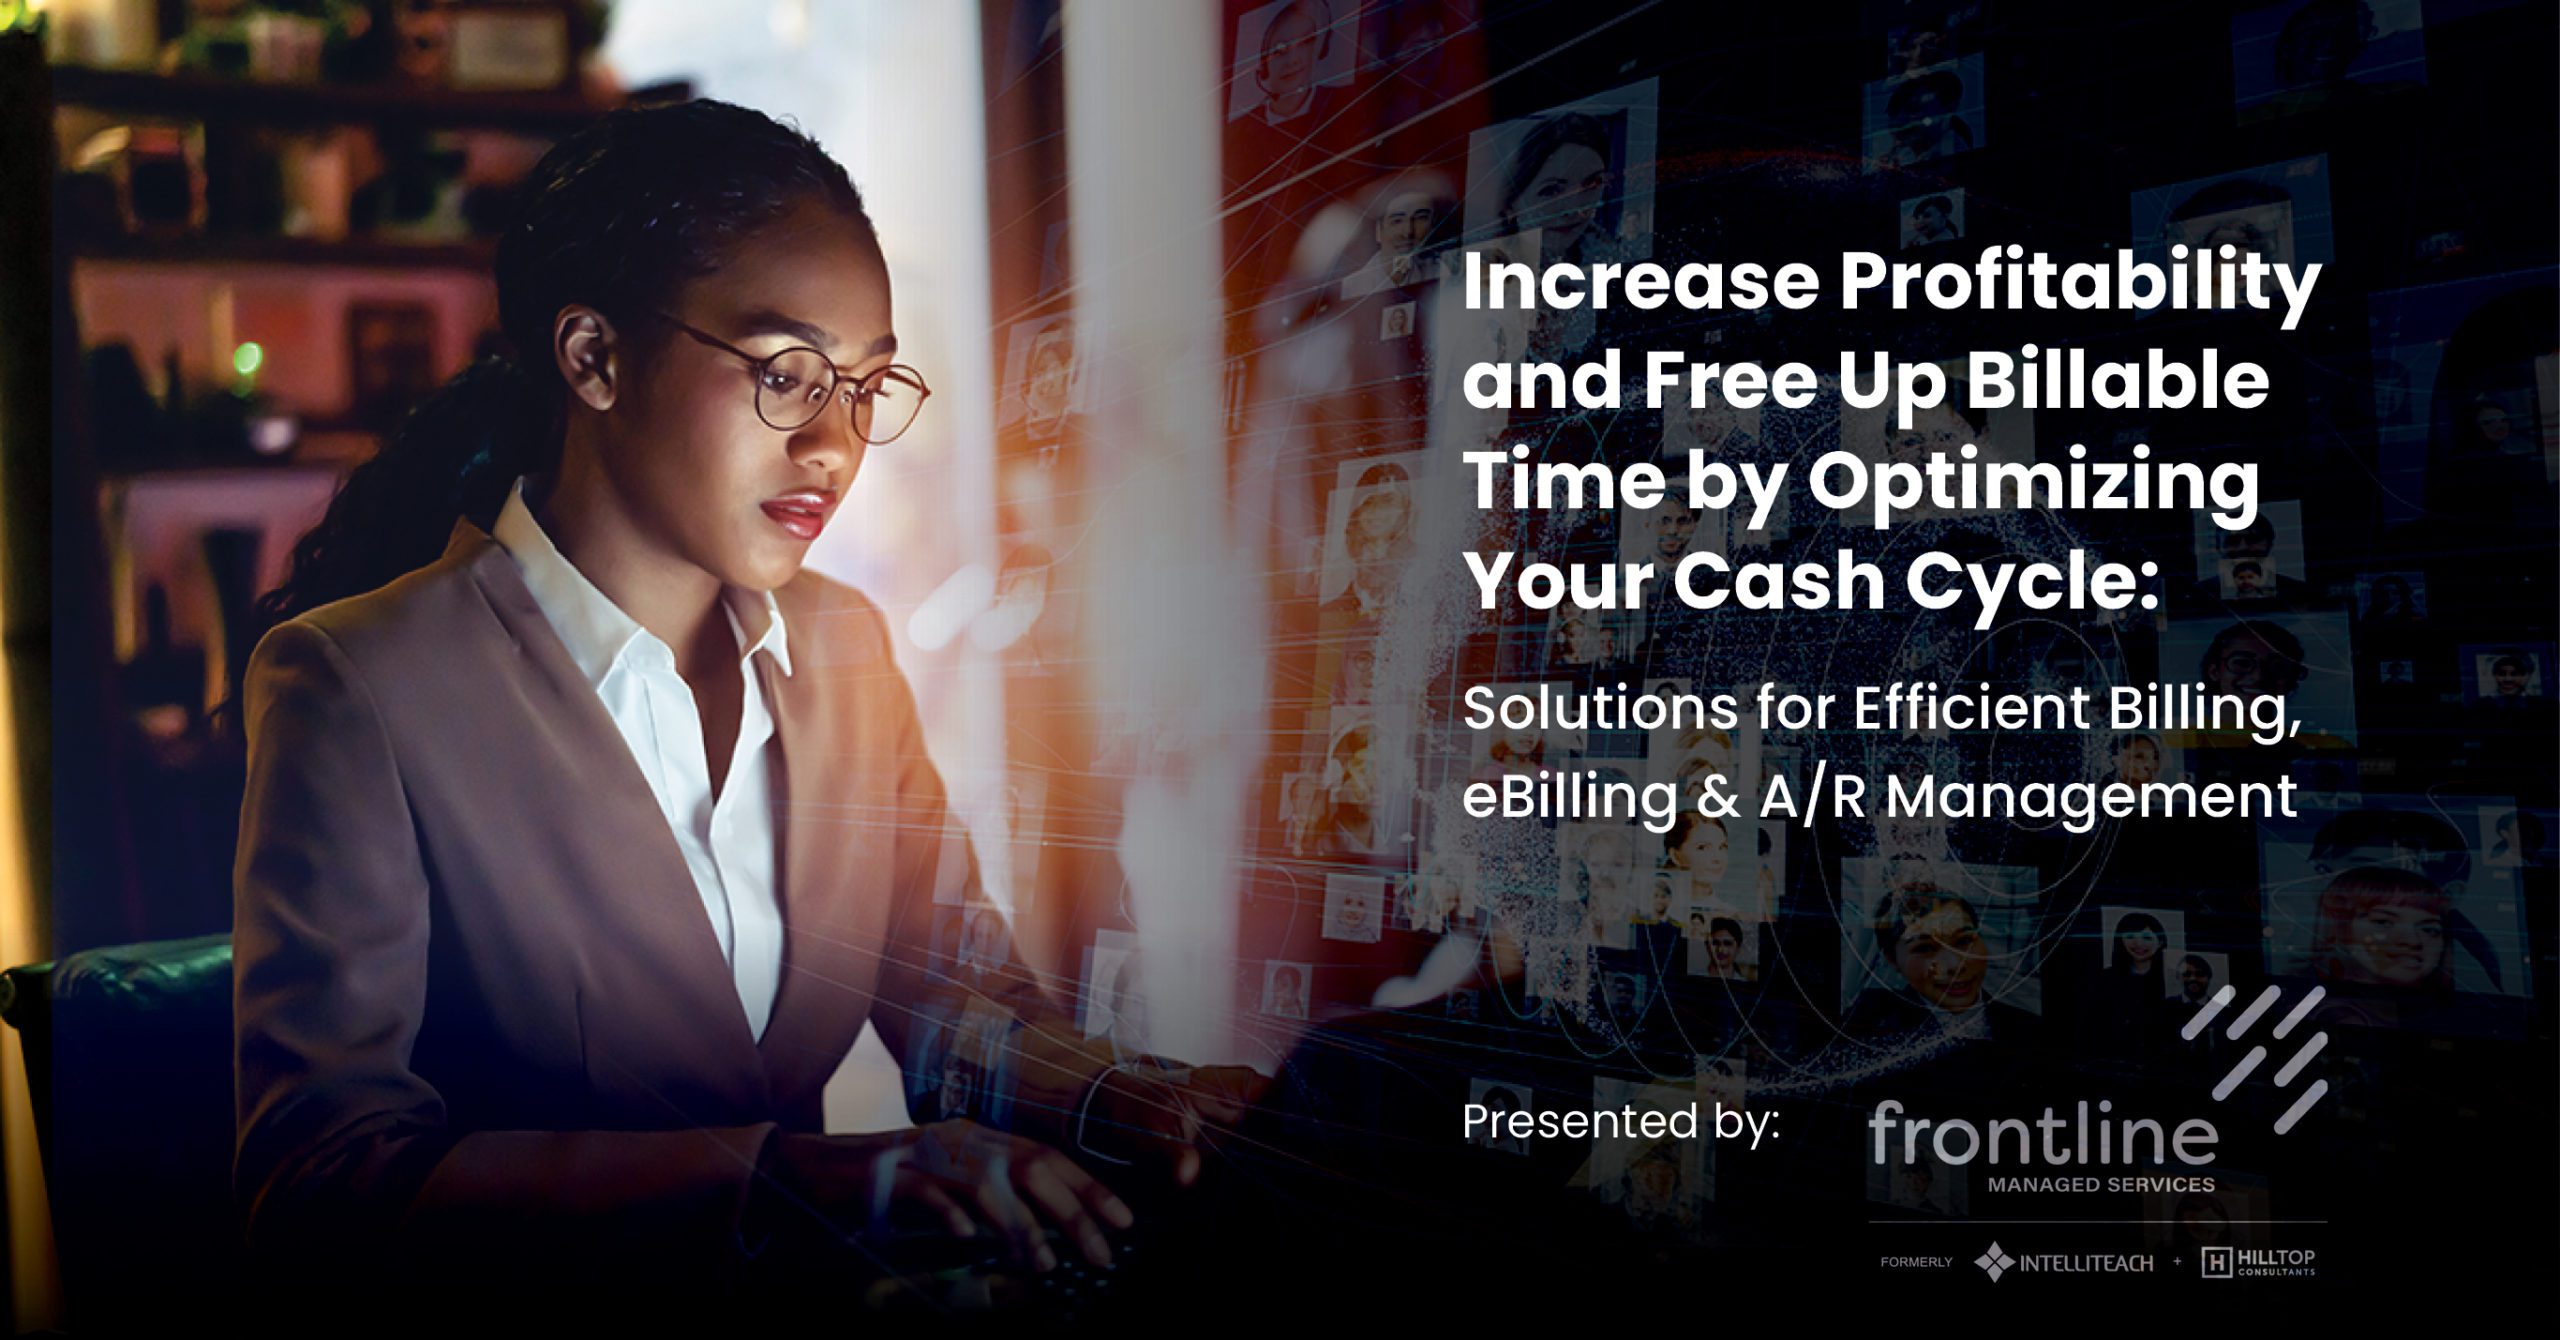 frontlinems-increasing-profit-by-optimizing-your-cash-cycle